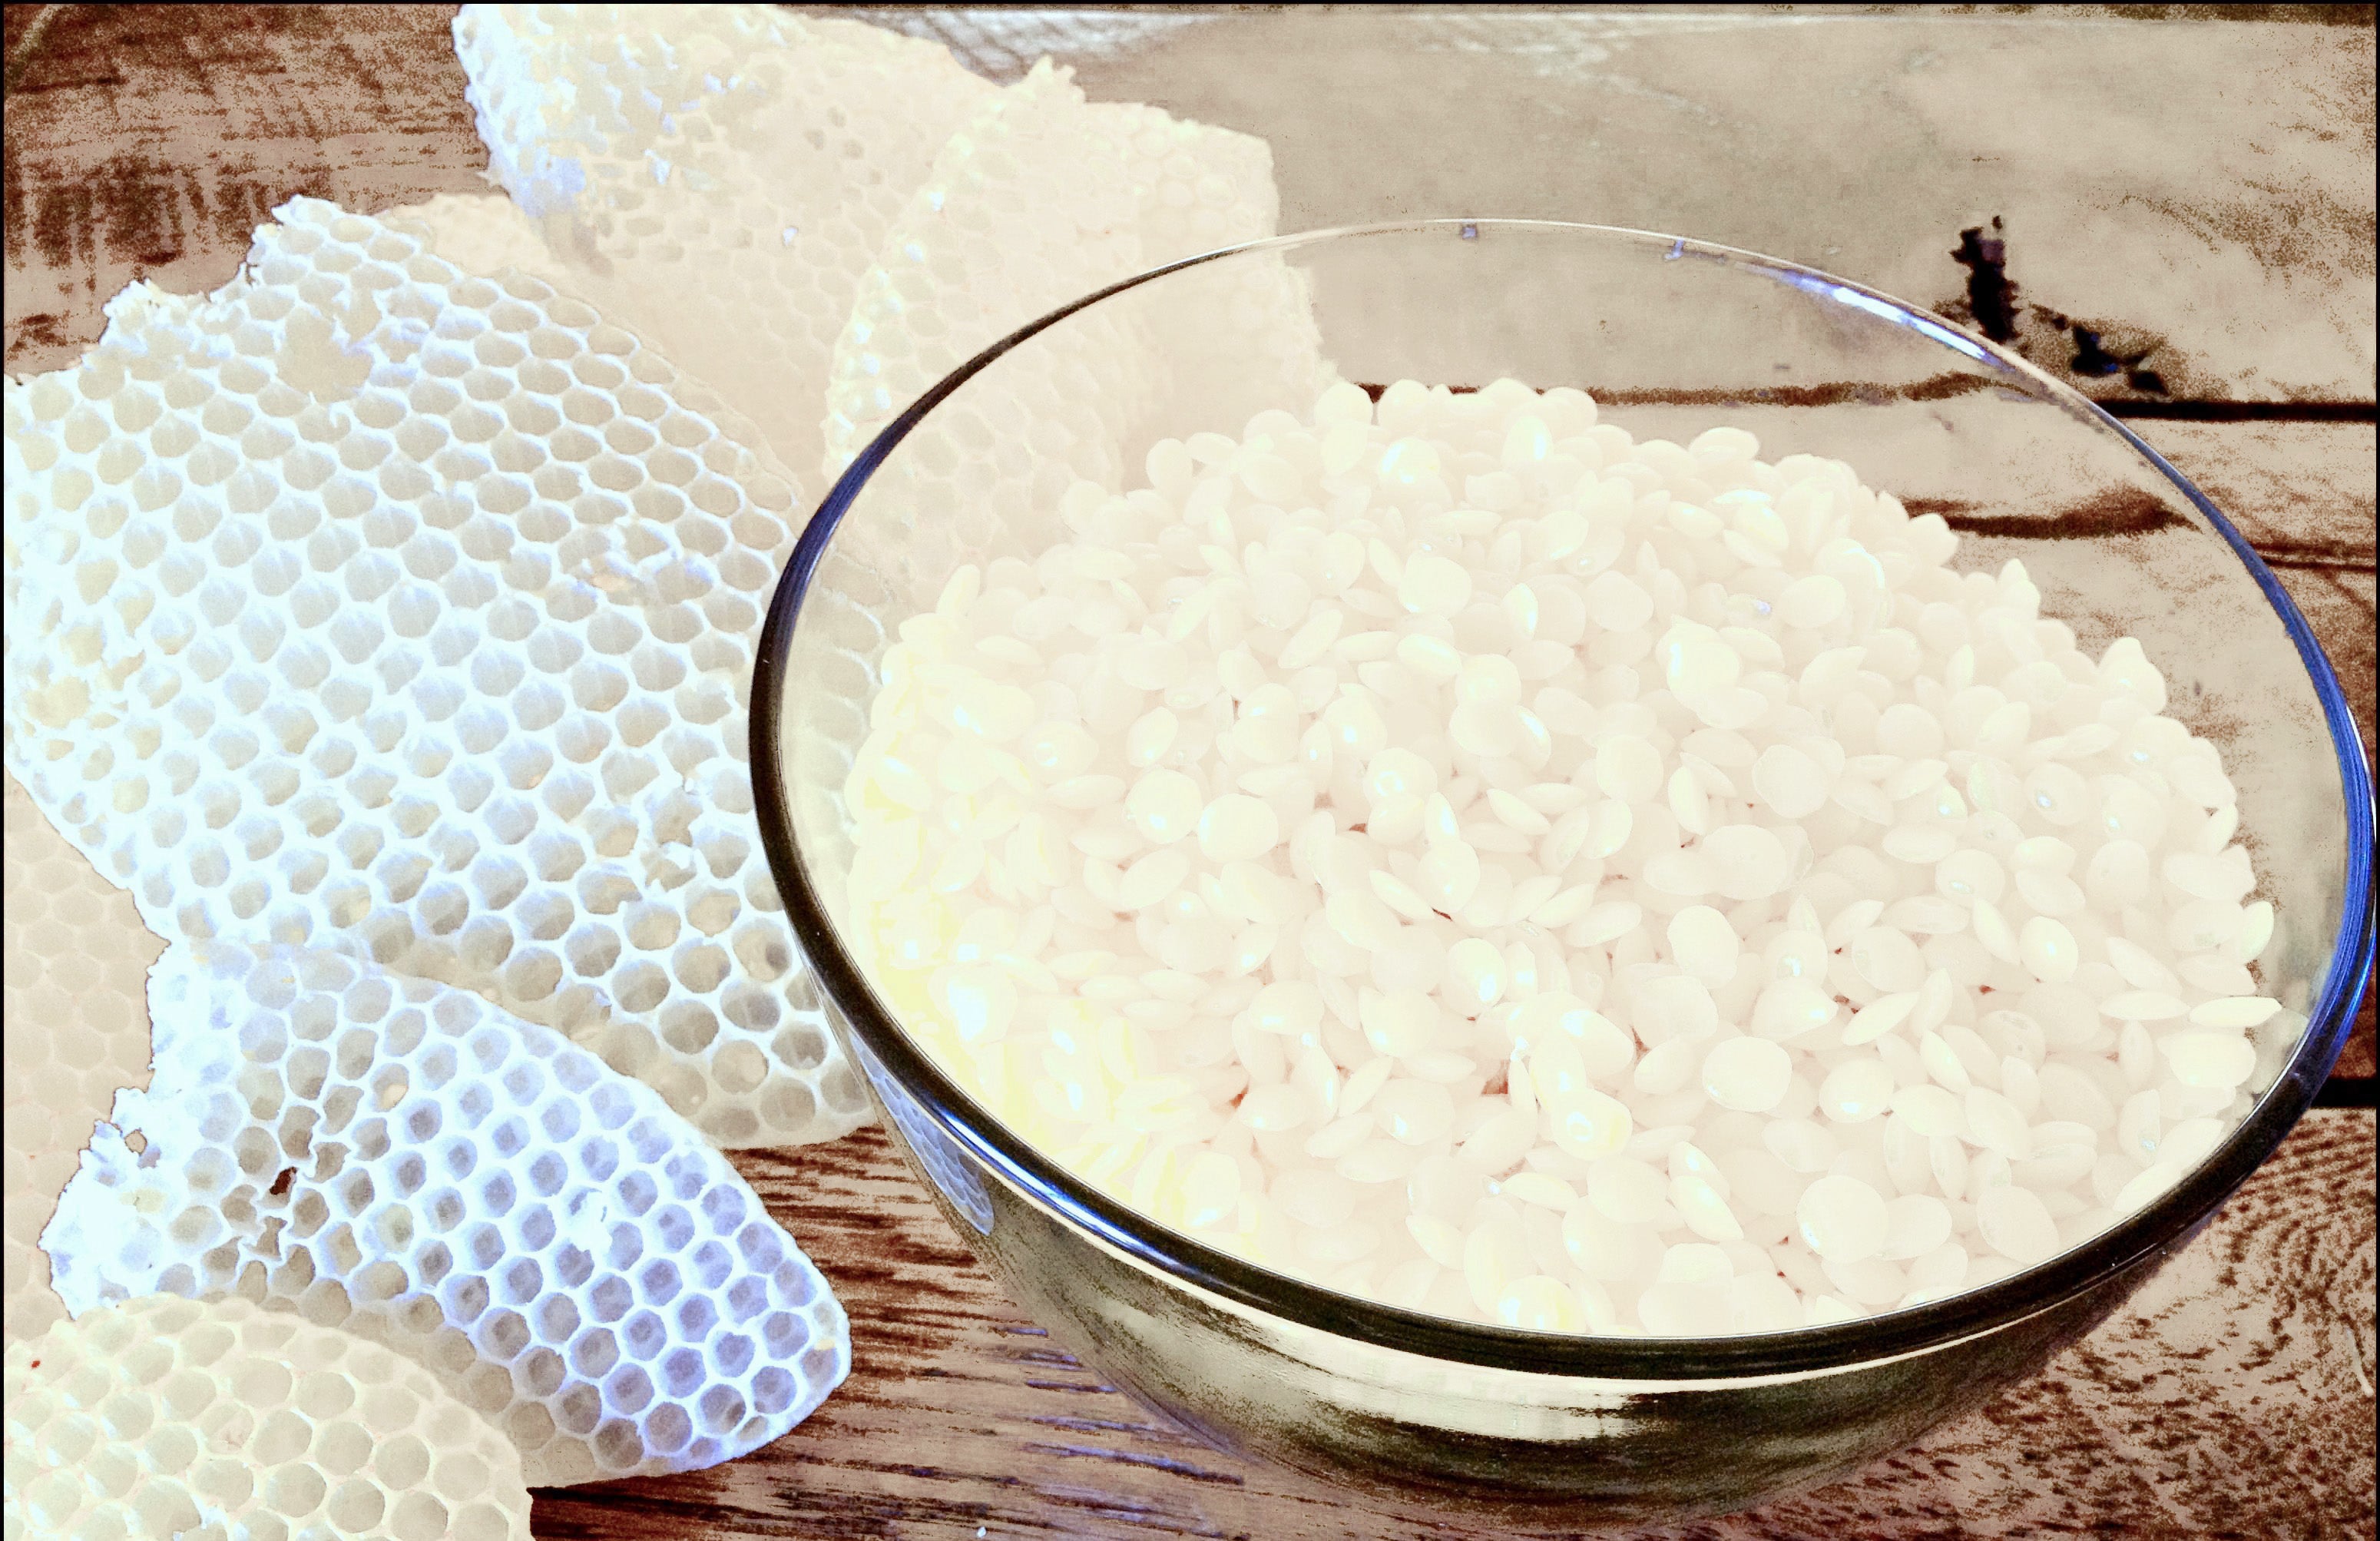 White (BP Grade) Beeswax Pellets - Naturally Fragrant Beeswax